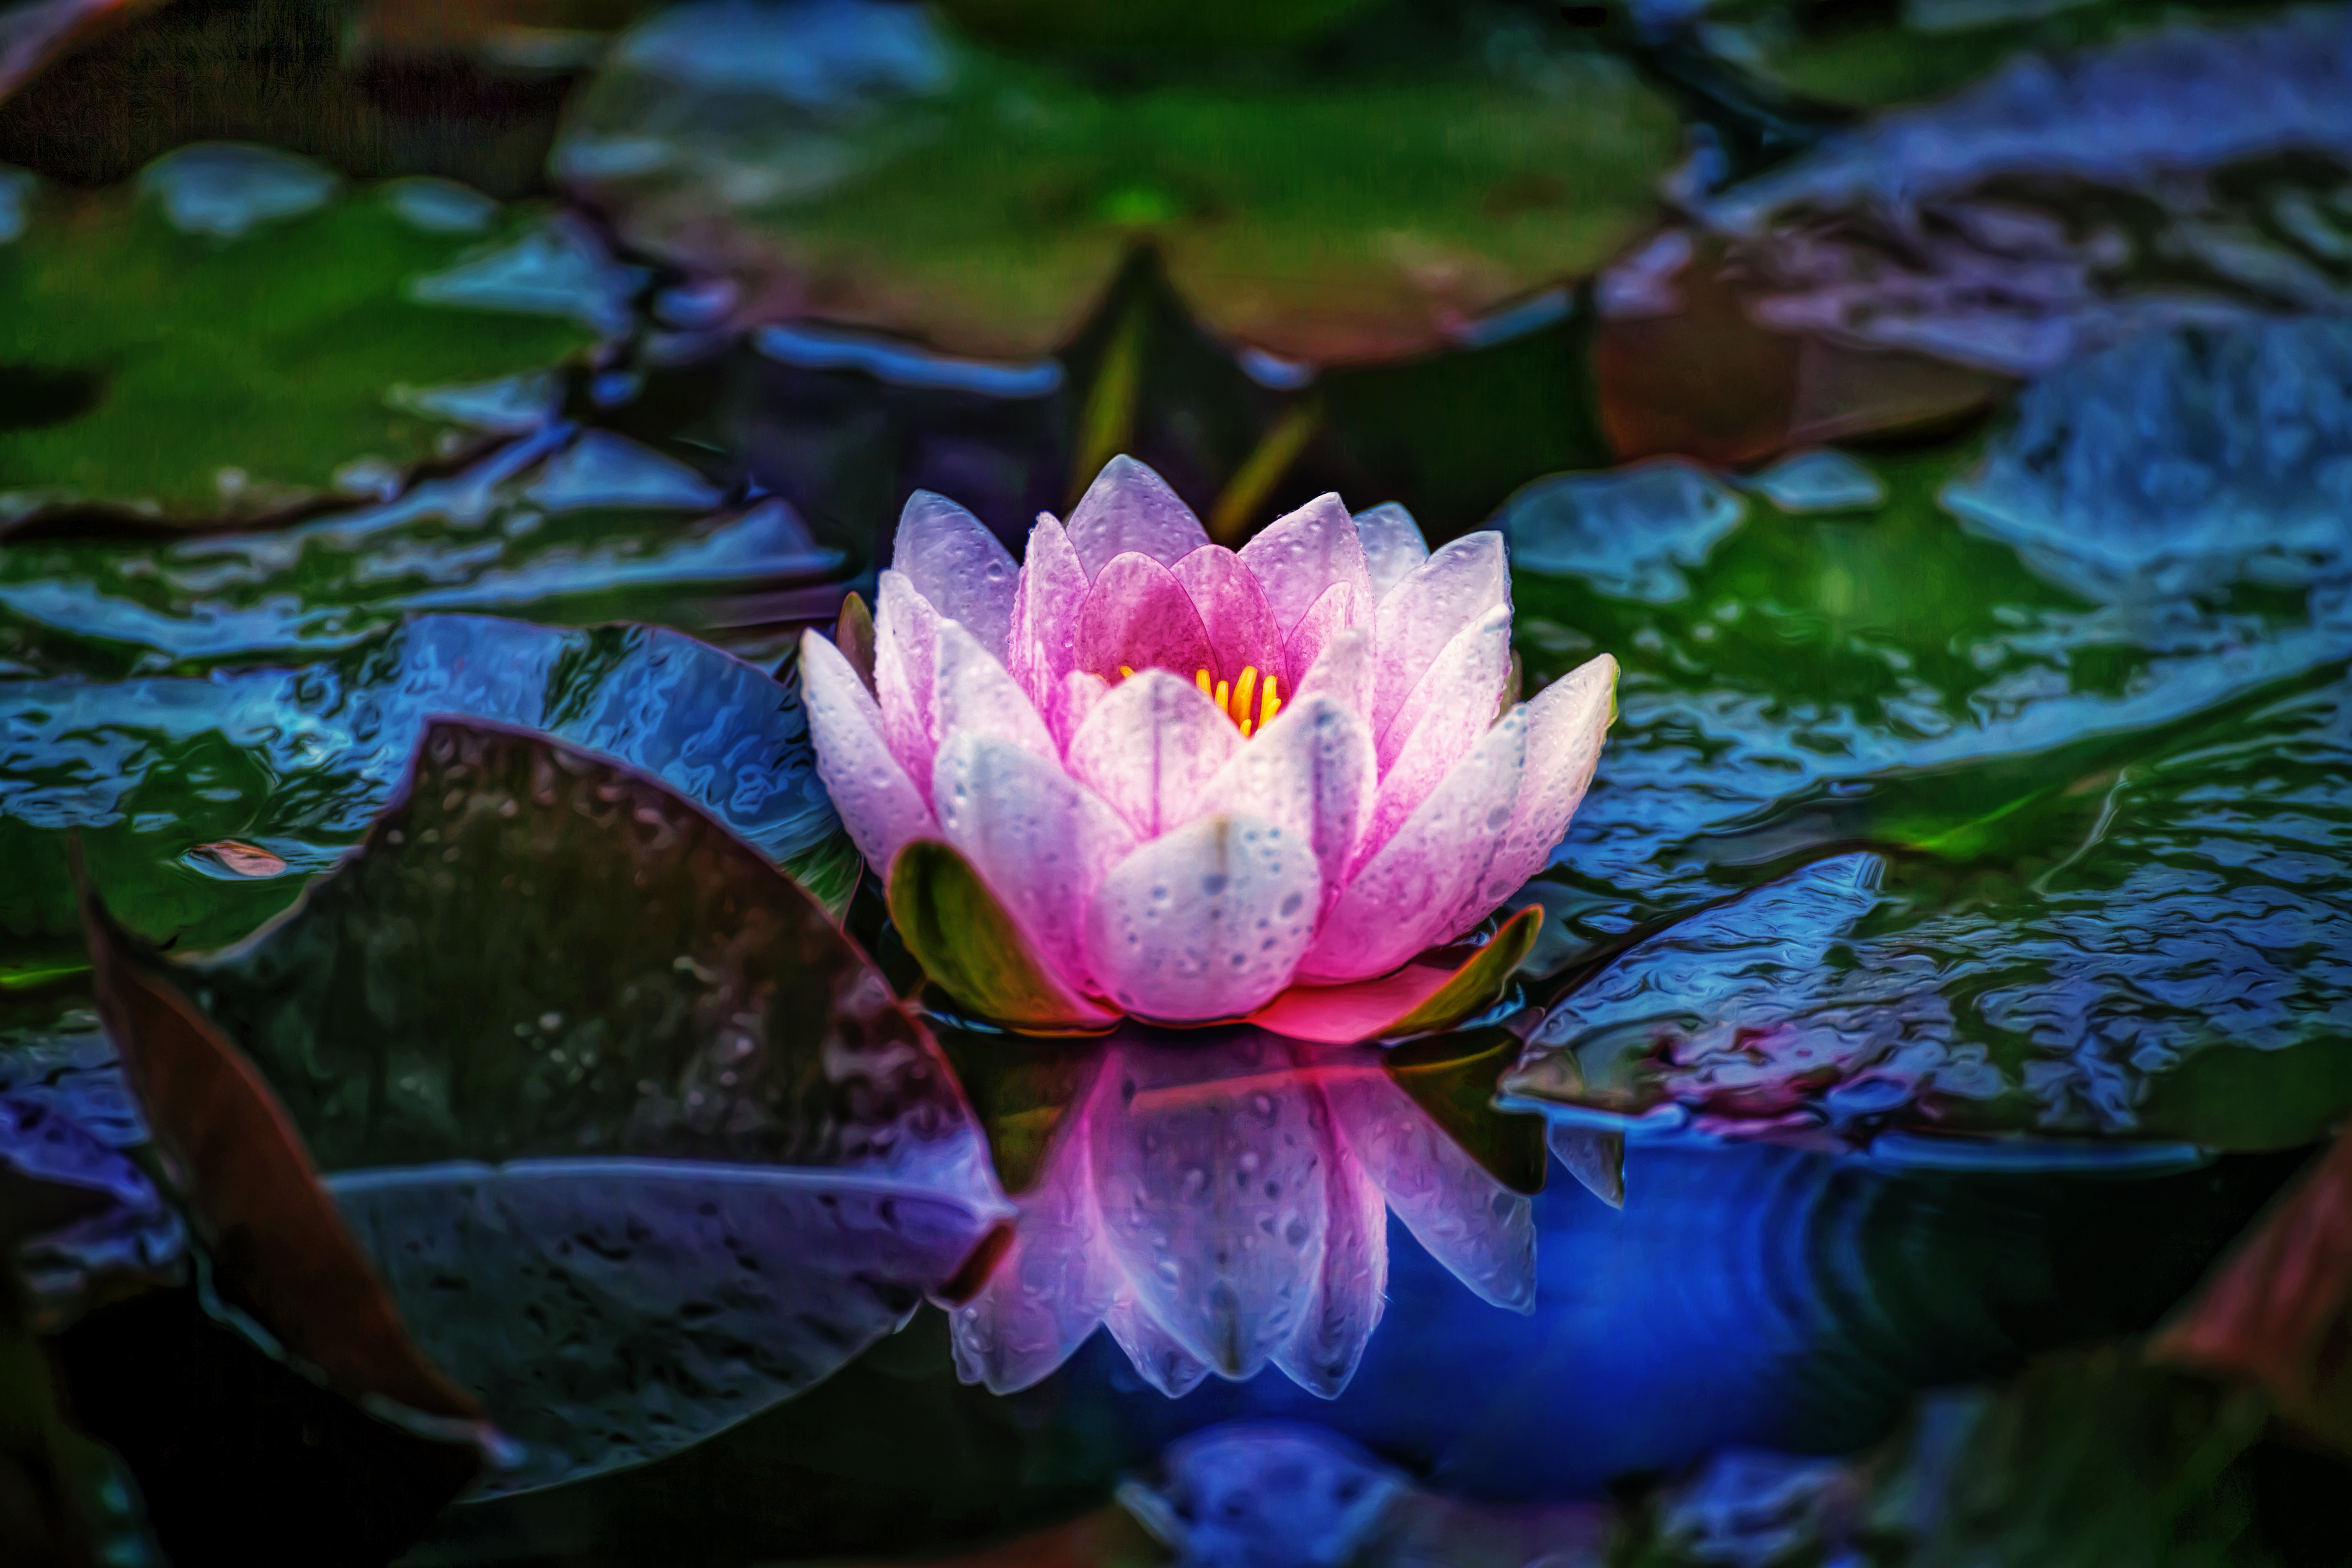 earth, water lily, dew, leaf, macro, pink flower, reflection, flowers